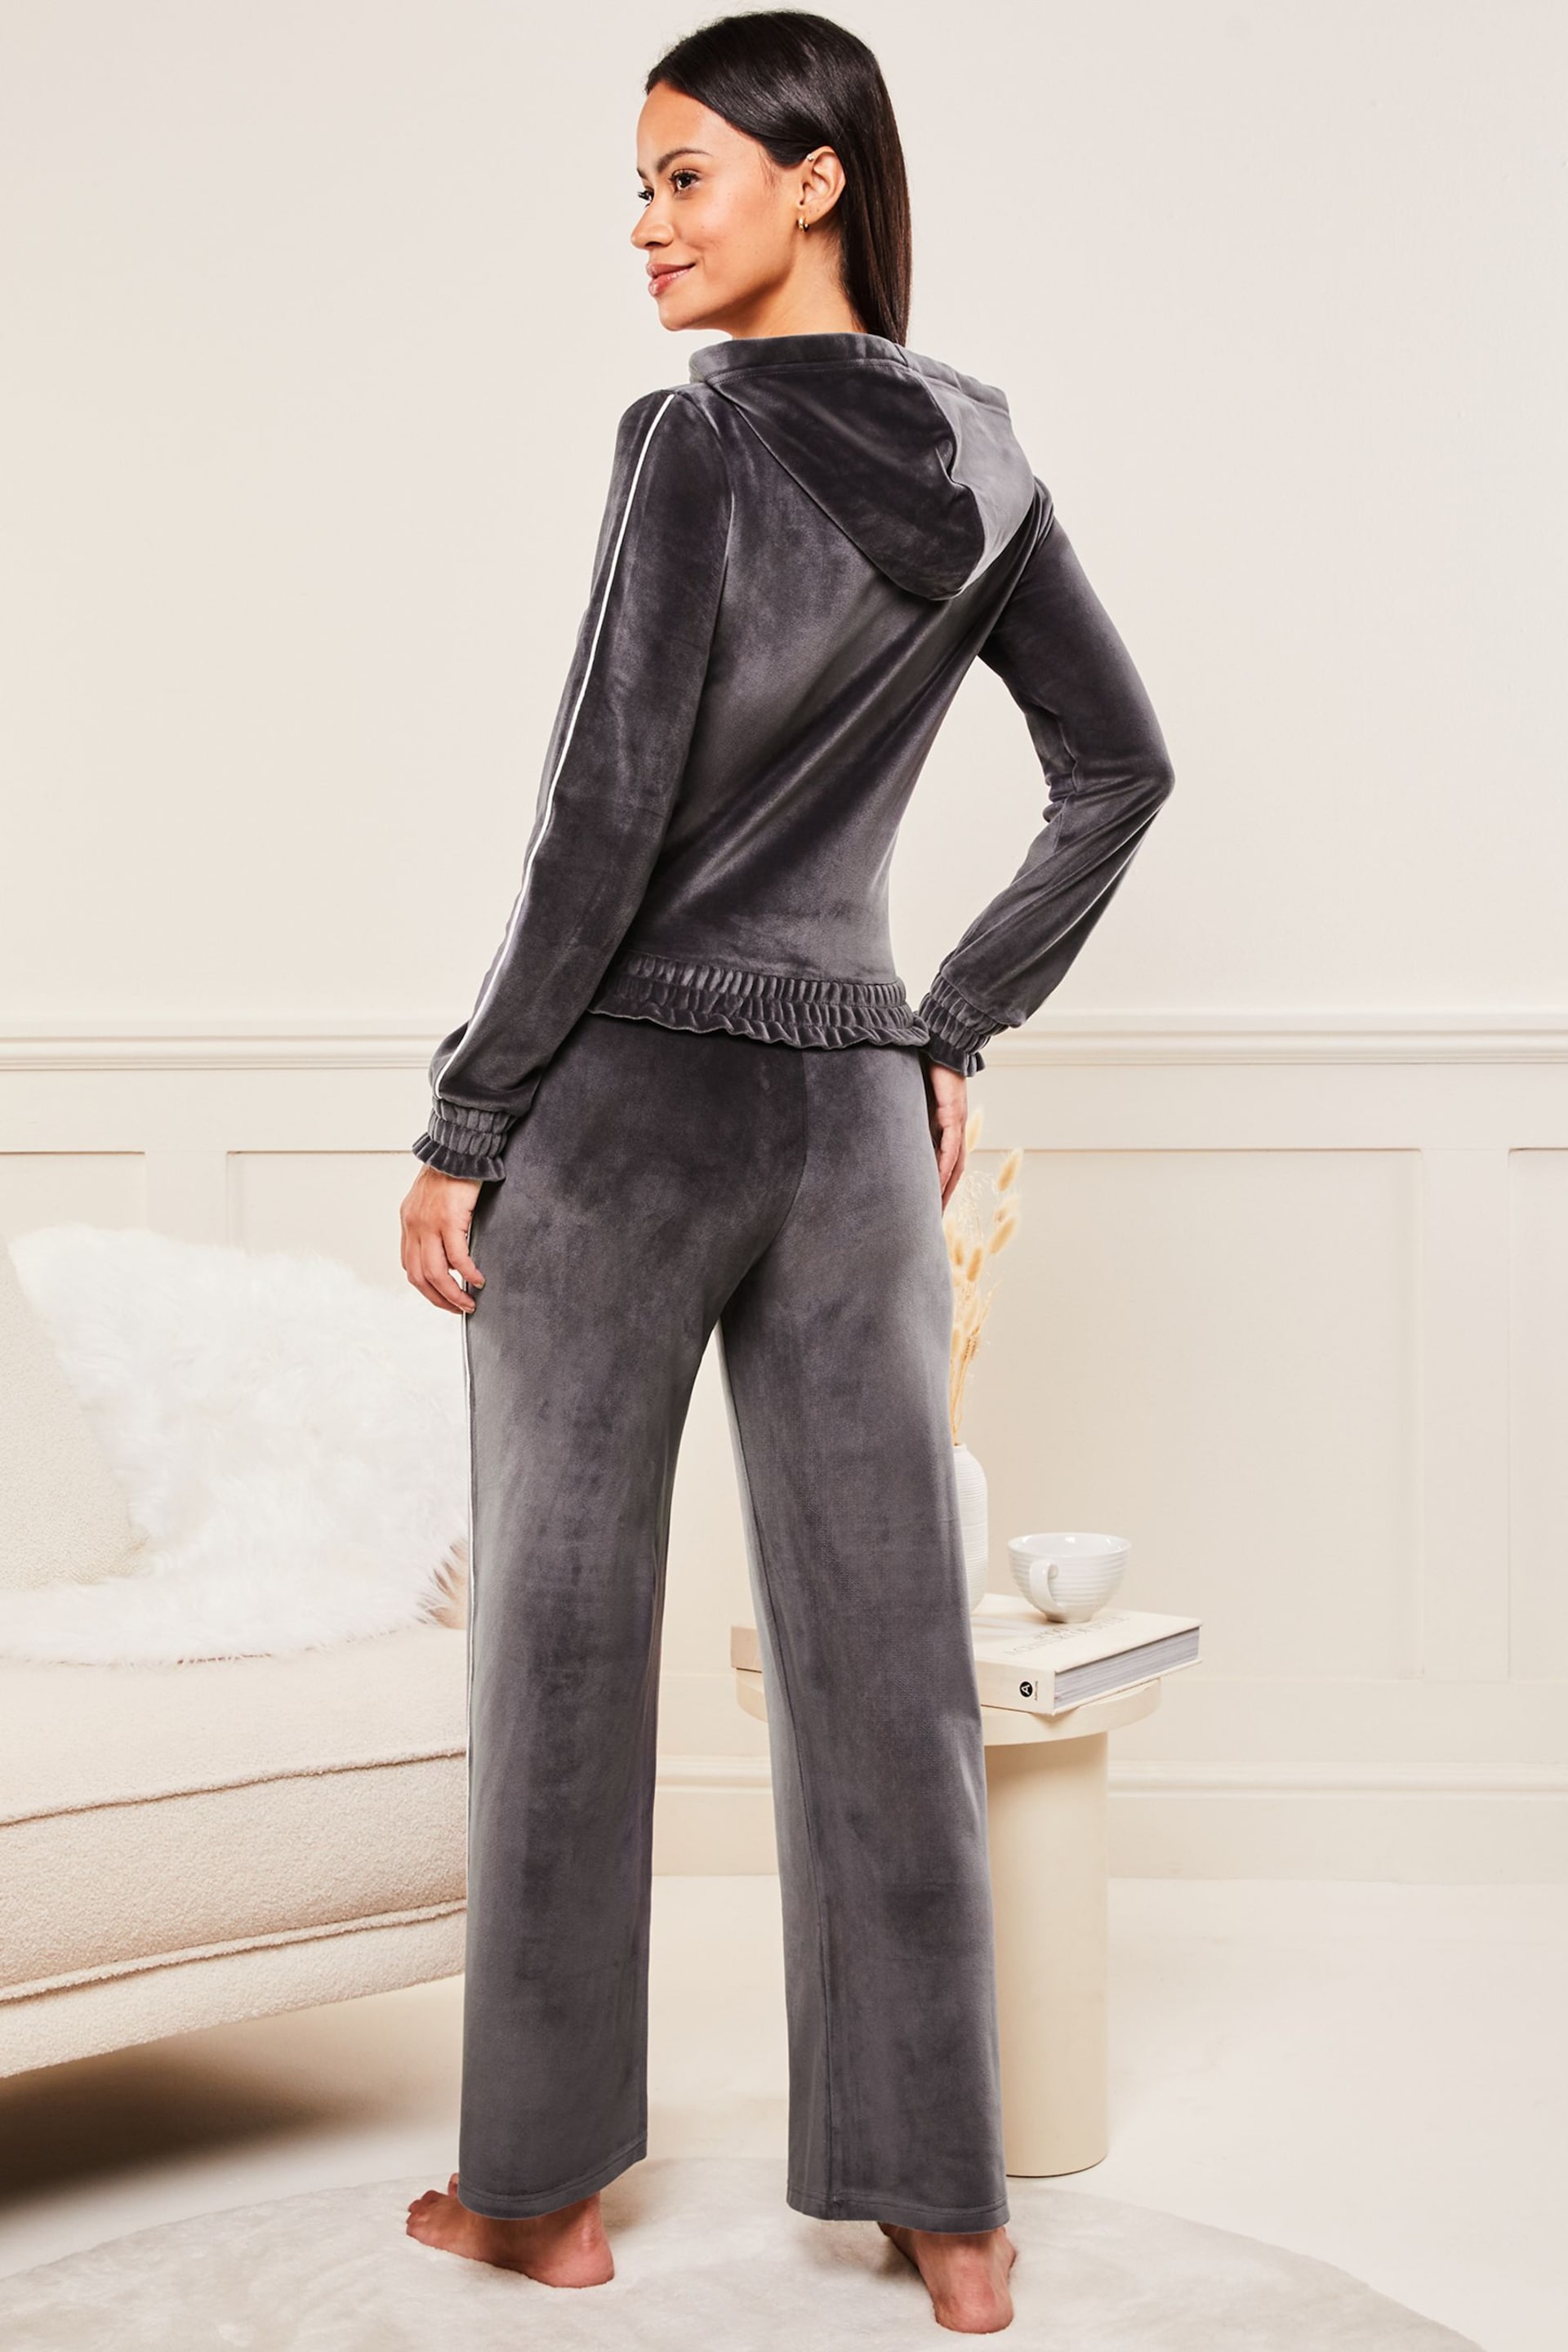 Lipsy Grey Velour Trimmed Wide Leg Trousers - Image 2 of 4